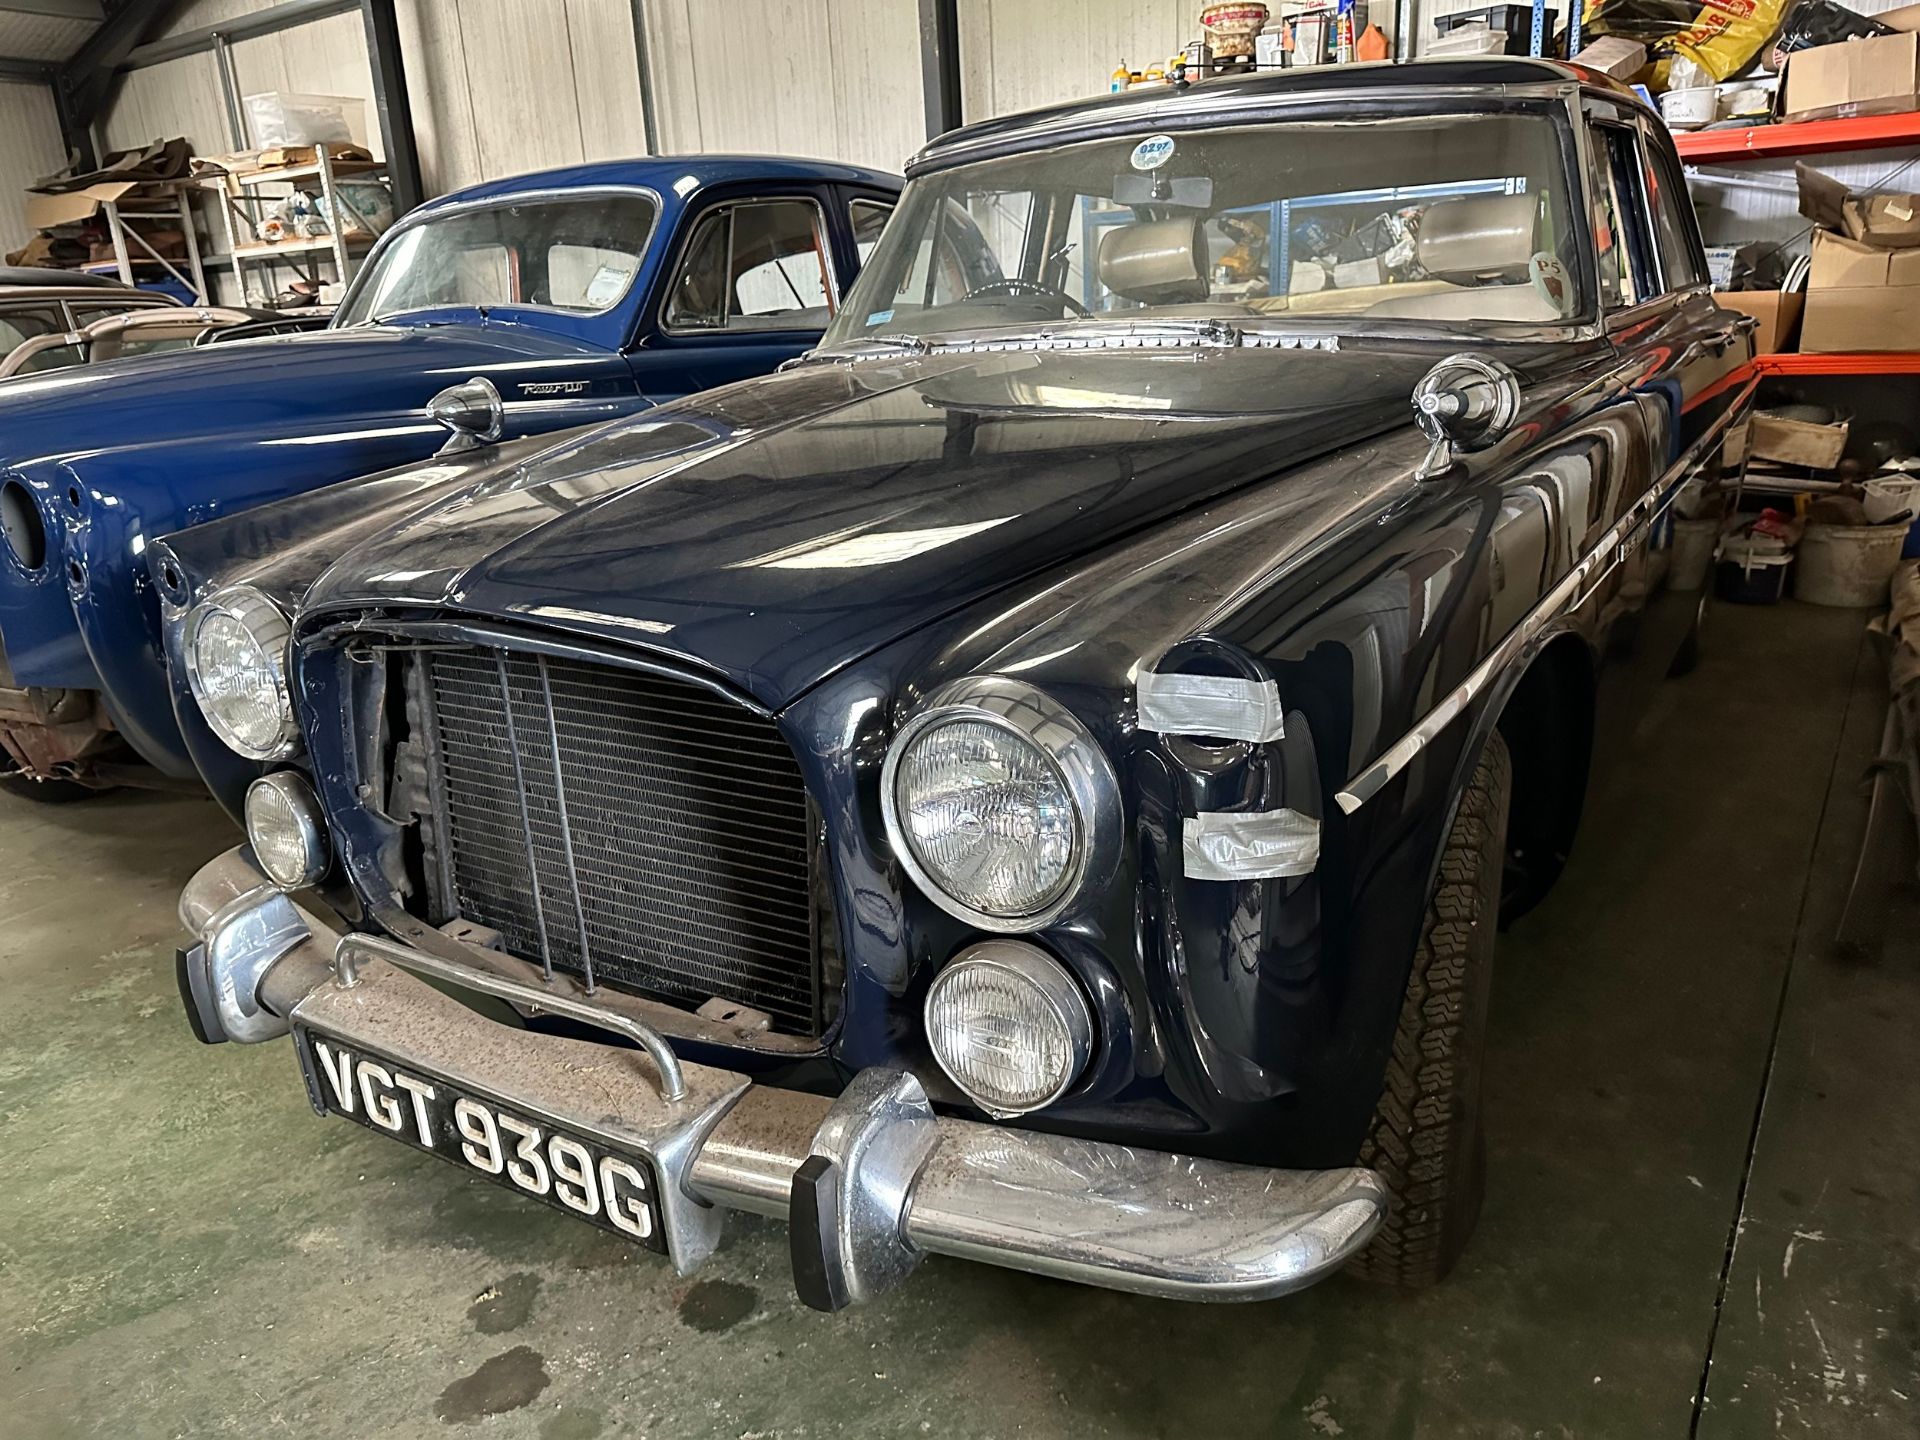 1969 Rover P5B Saloon Being sold without reserve Registration number VGT 939G Chassis number - Image 24 of 25